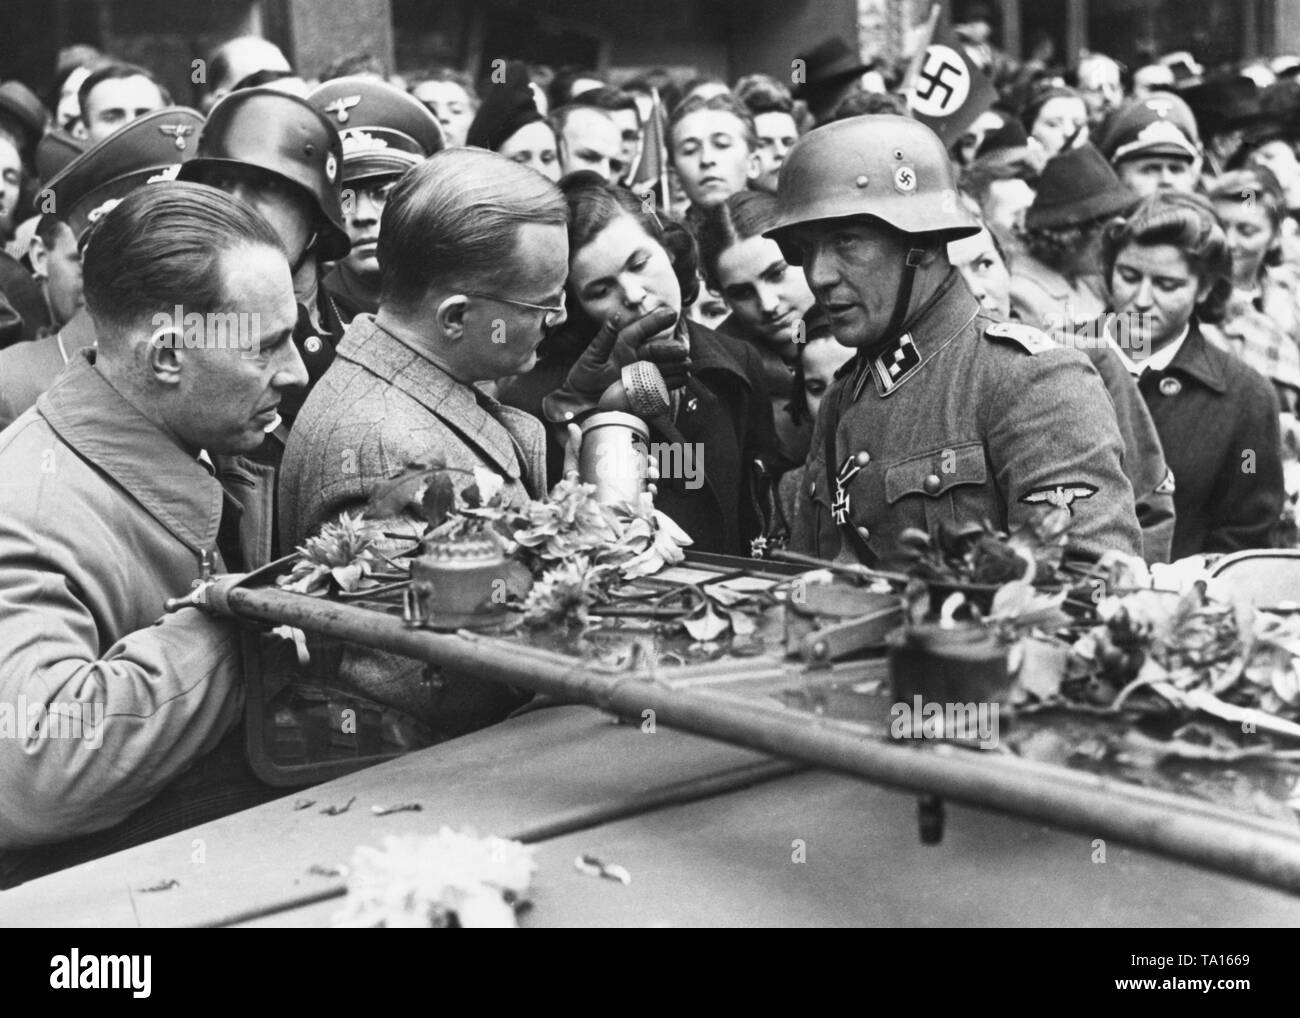 After having been deployed on the Eastern Front, the SS Leibstandarte (Guard of Corps) returns to Prague. The company commander gives a radio interview during the celebrations. In September, Hitler starts World War II by attacking Poland. Stock Photo